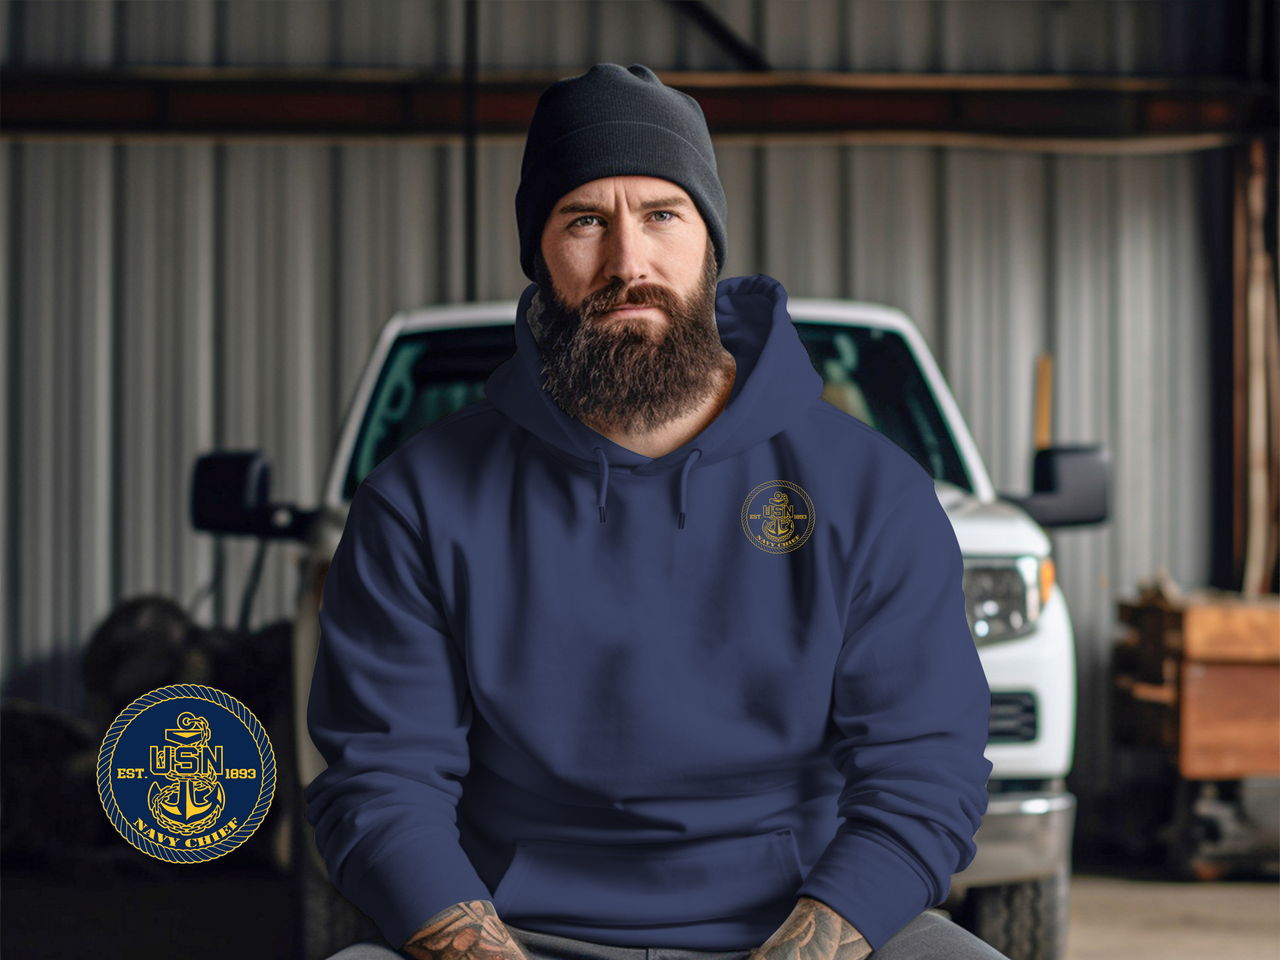 Navy Chief Hoodie 1893 (Gold)